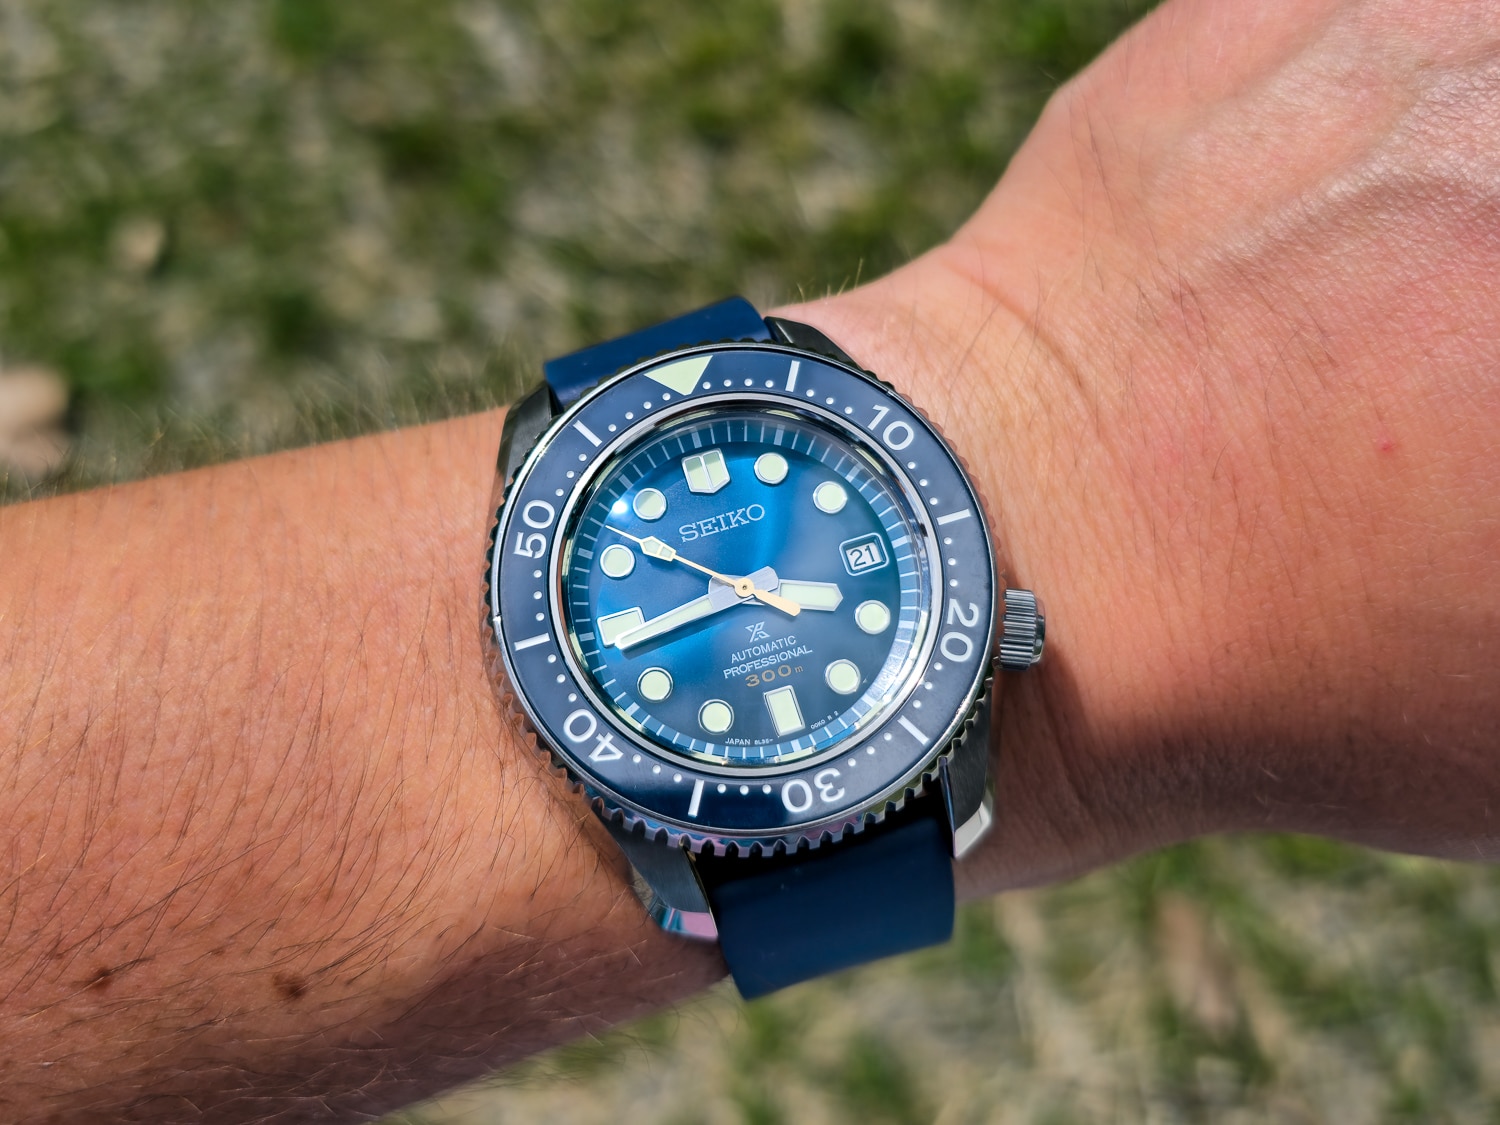 Seiko Marinemaster: Is It The Quintessential Seiko Dive Watch?